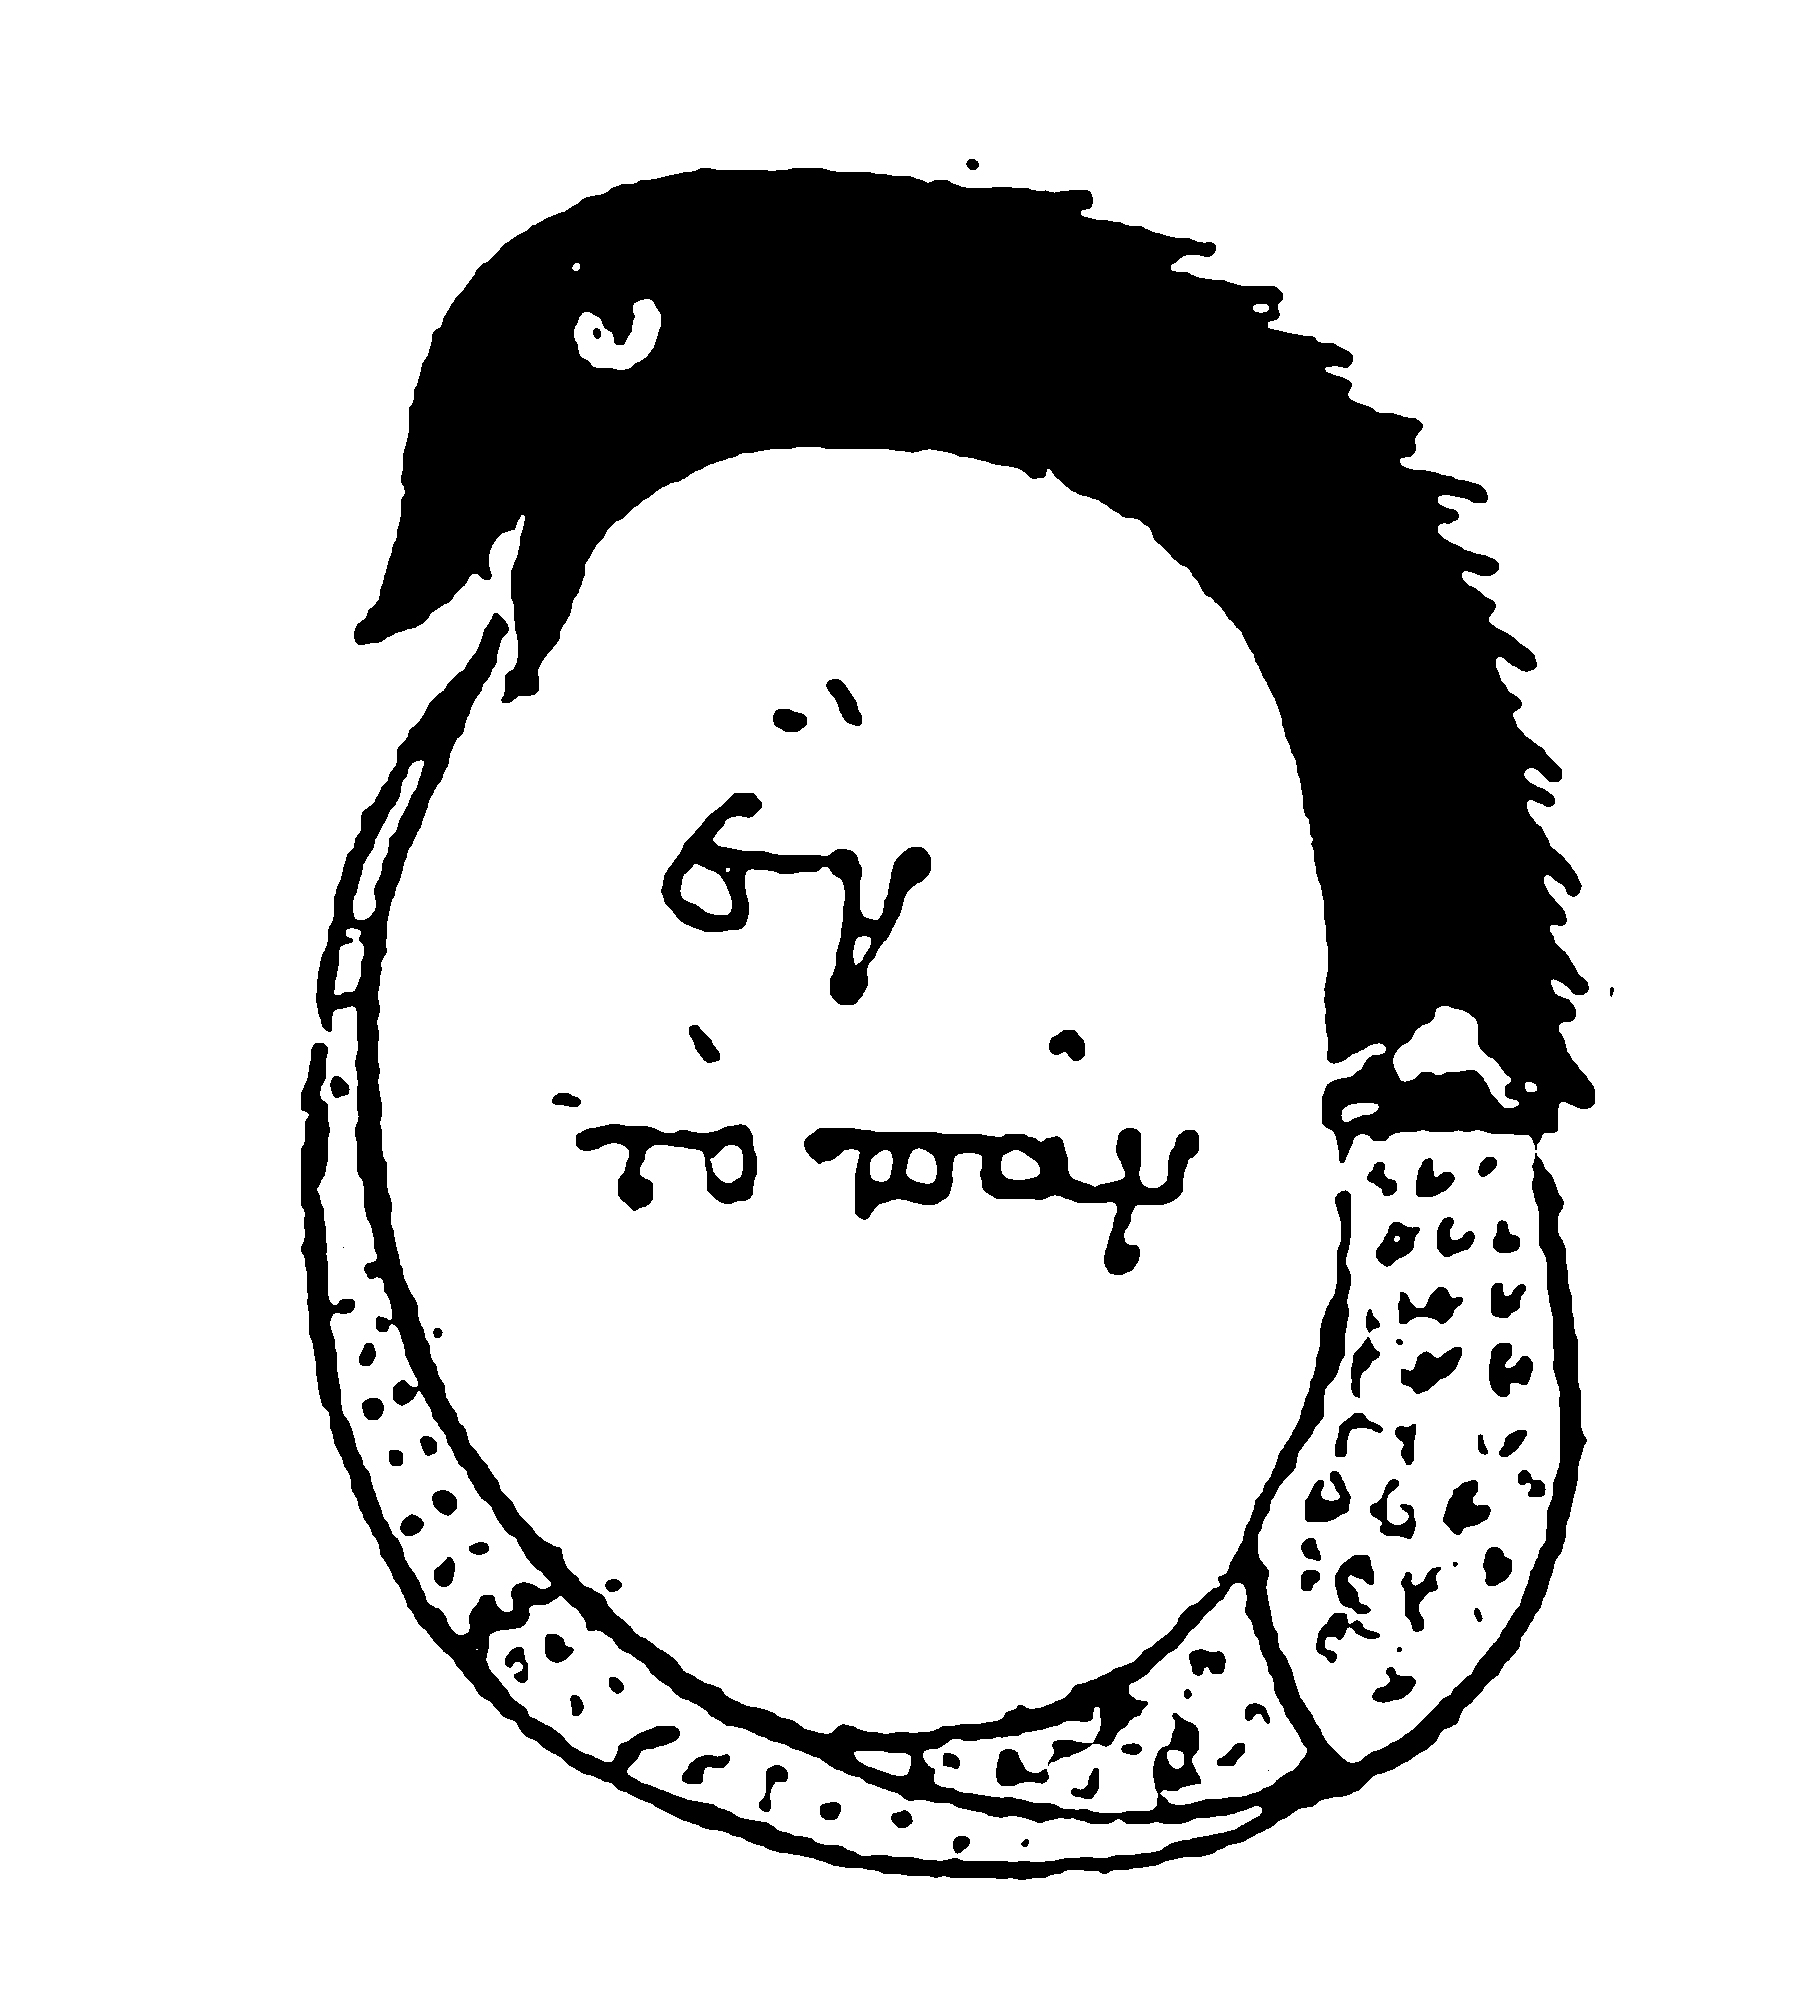 early alchemical ouroboros illustration with the words 'The All is One'